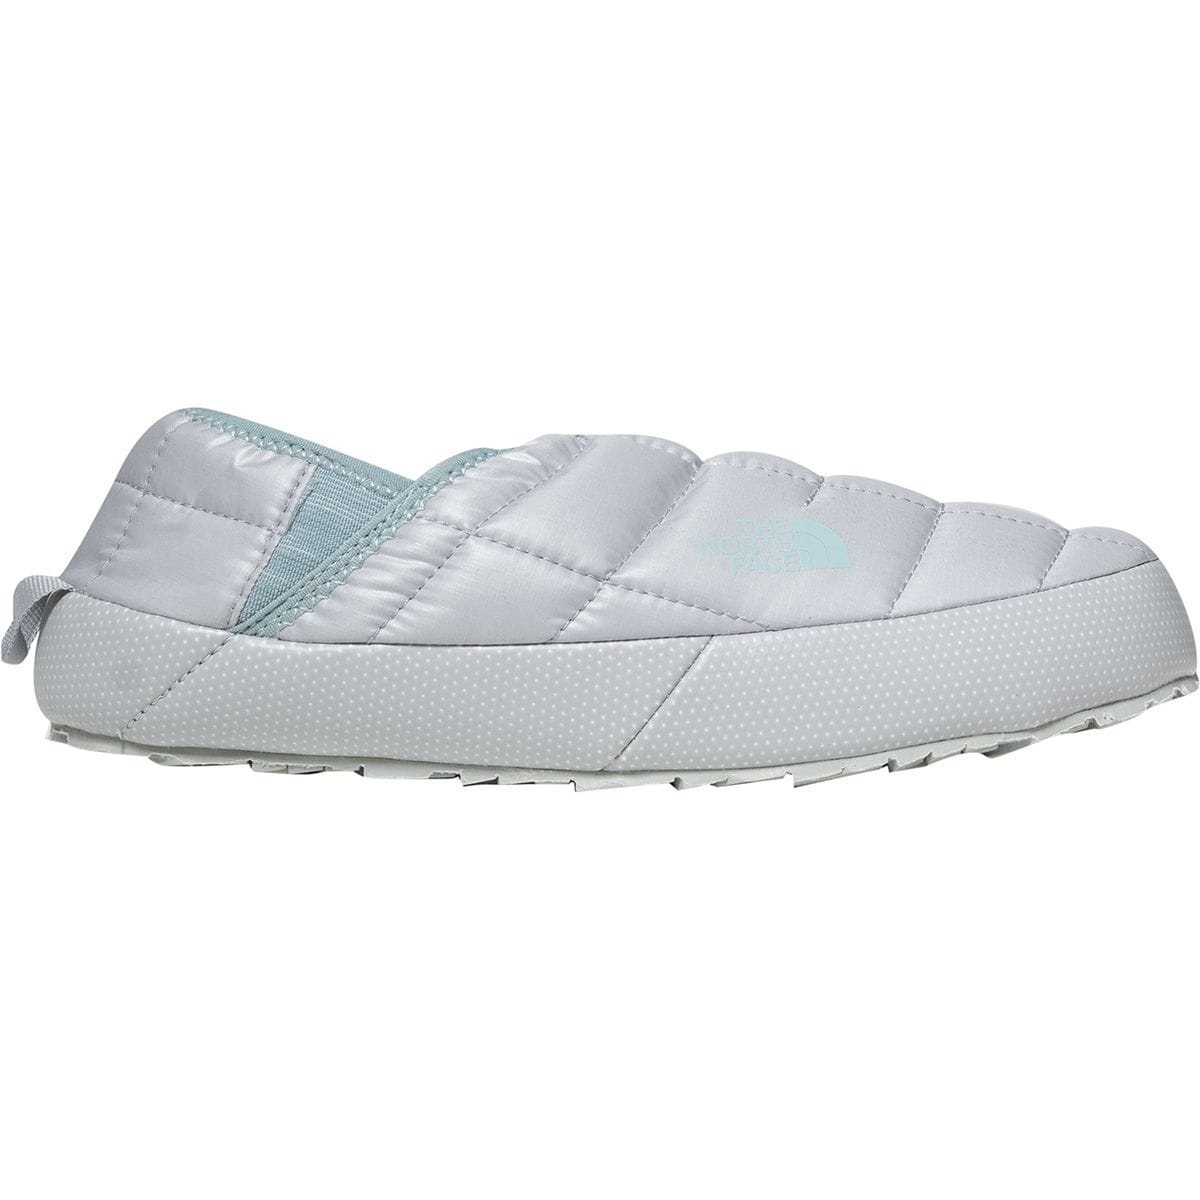 Thermoball Traction Mule V Shoe - Women